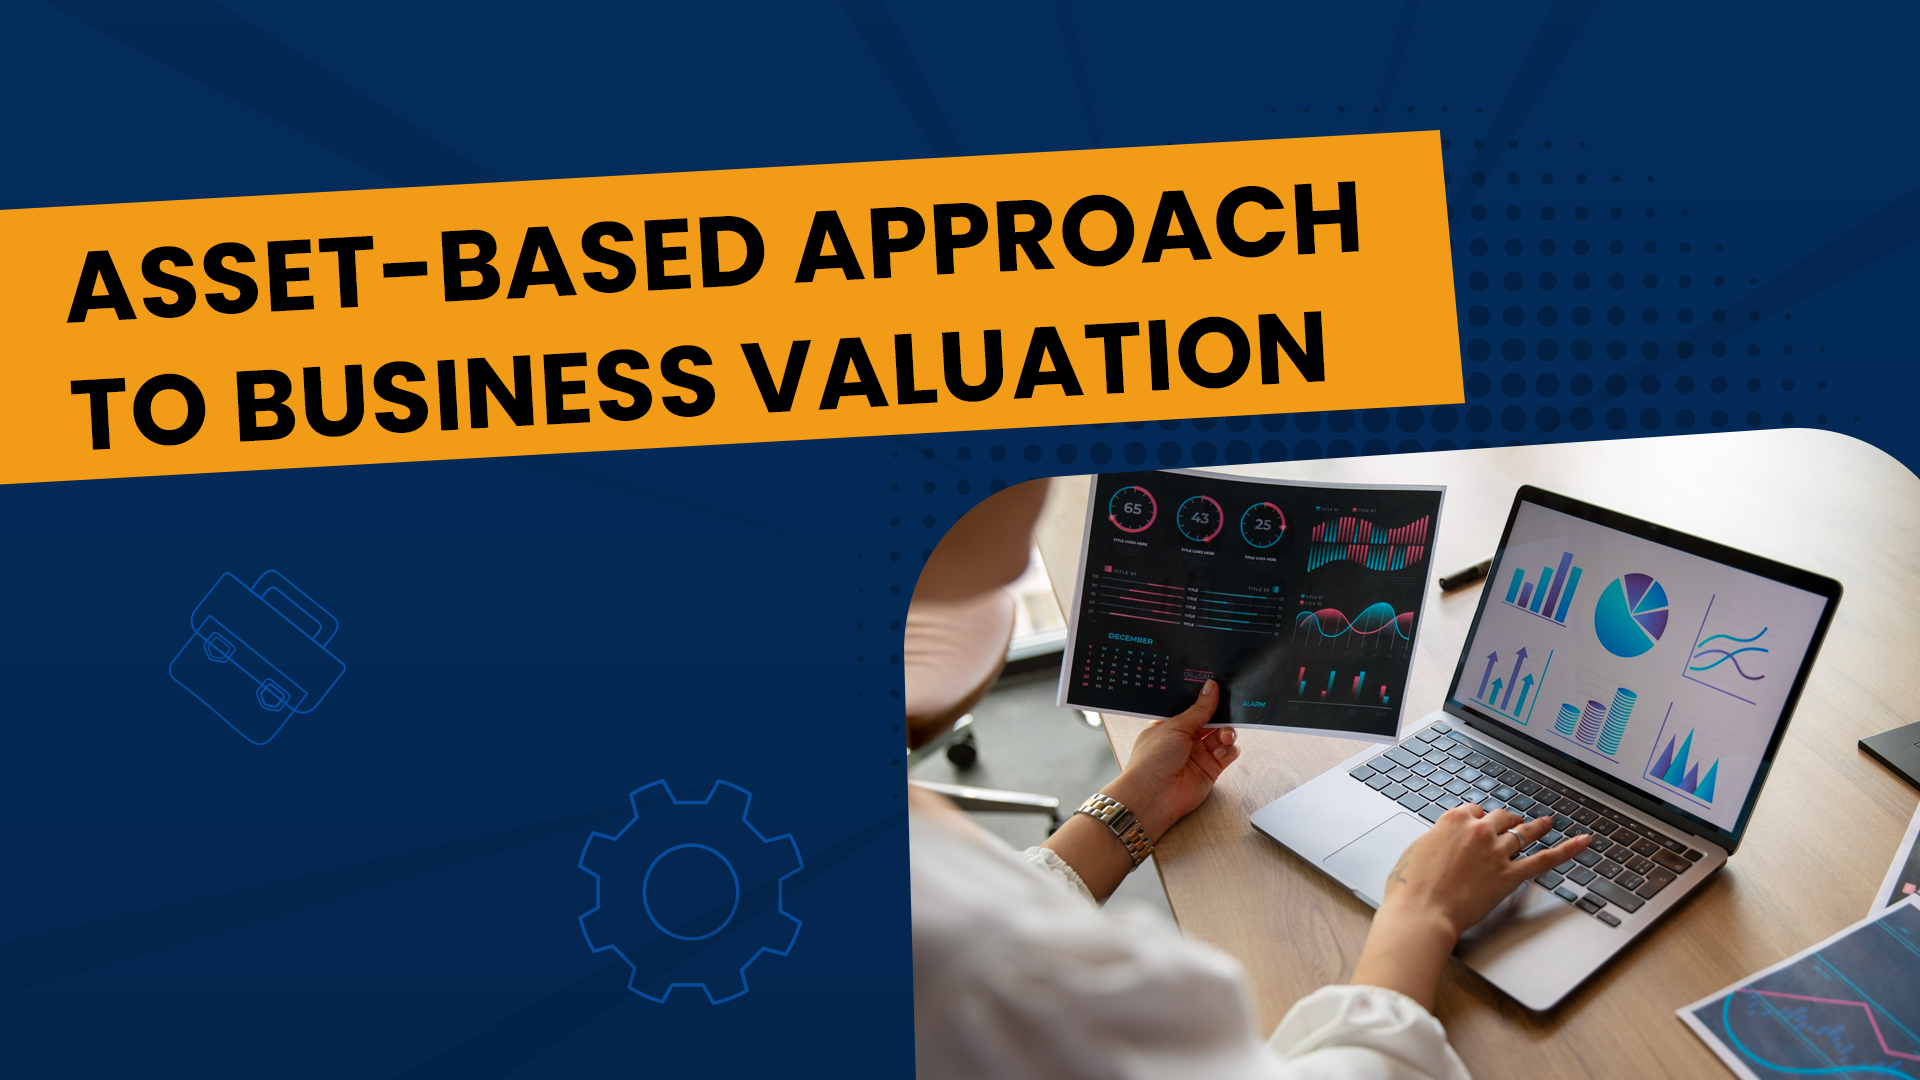 Asset-Based Approach to Business Valuation